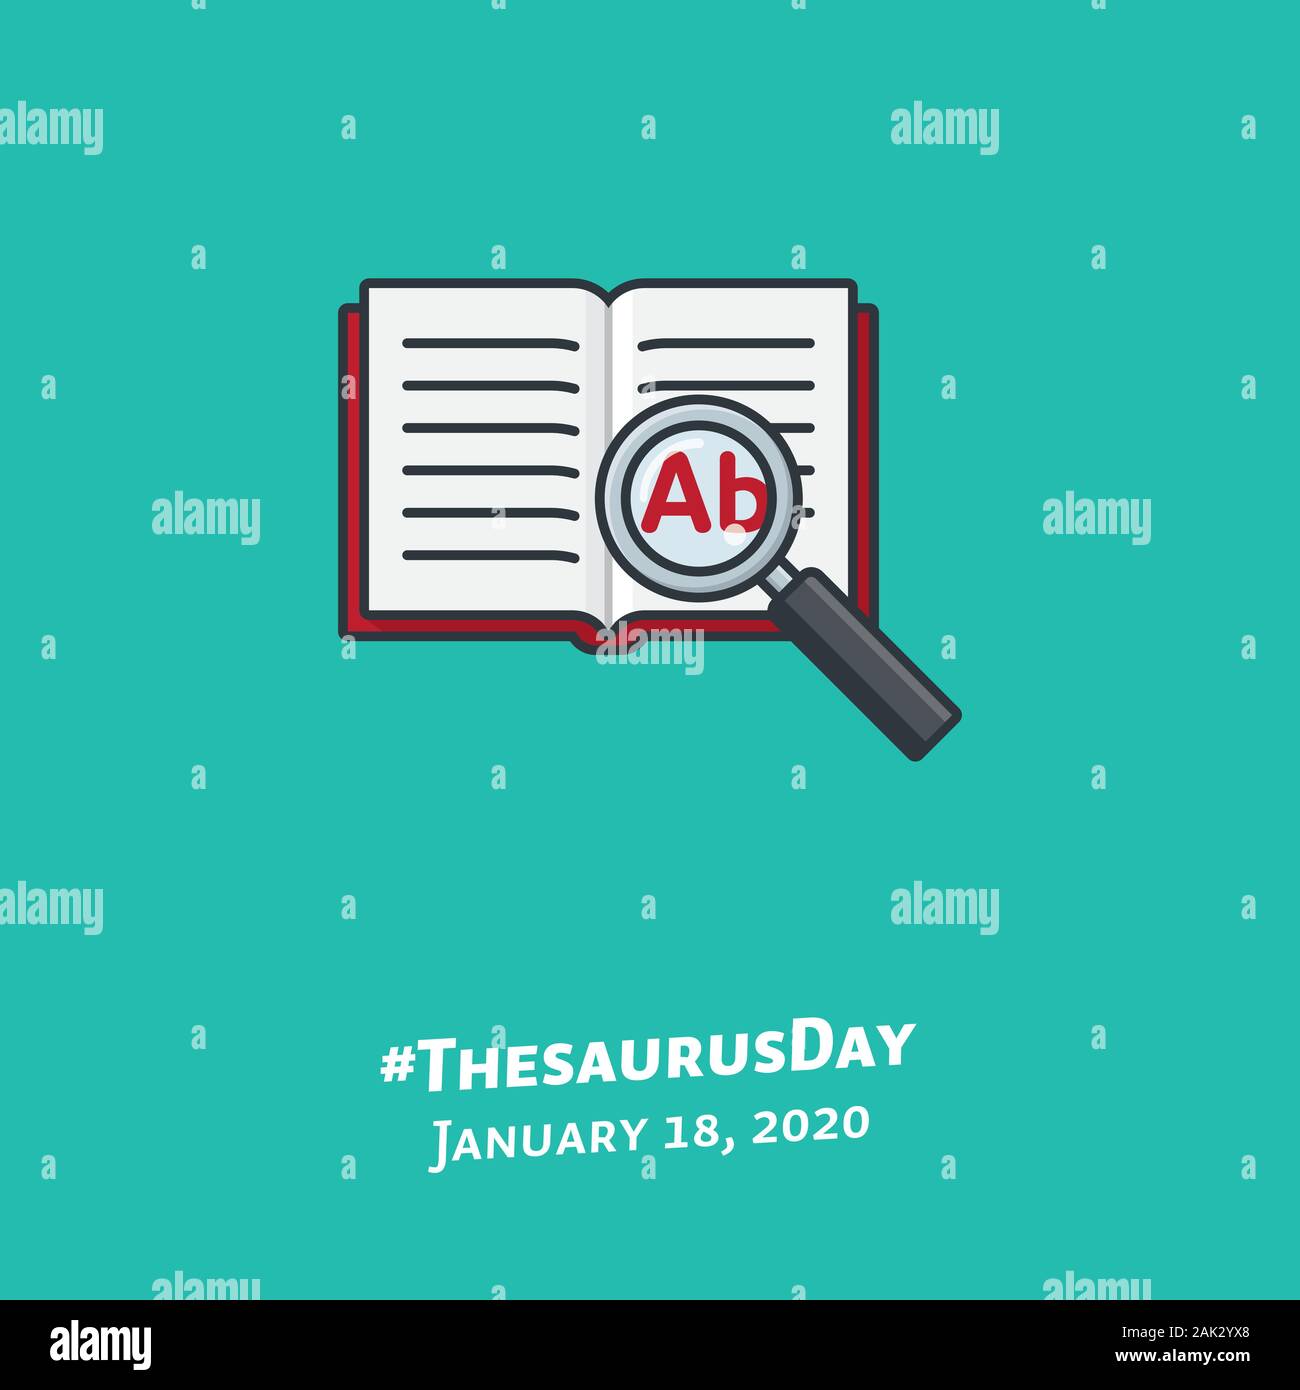 Thesaurus or encyclopedia with magnifying glass, color vector illustration for #ThesaurusDay on January 18. Knowledge, learning and education icon. Stock Vector